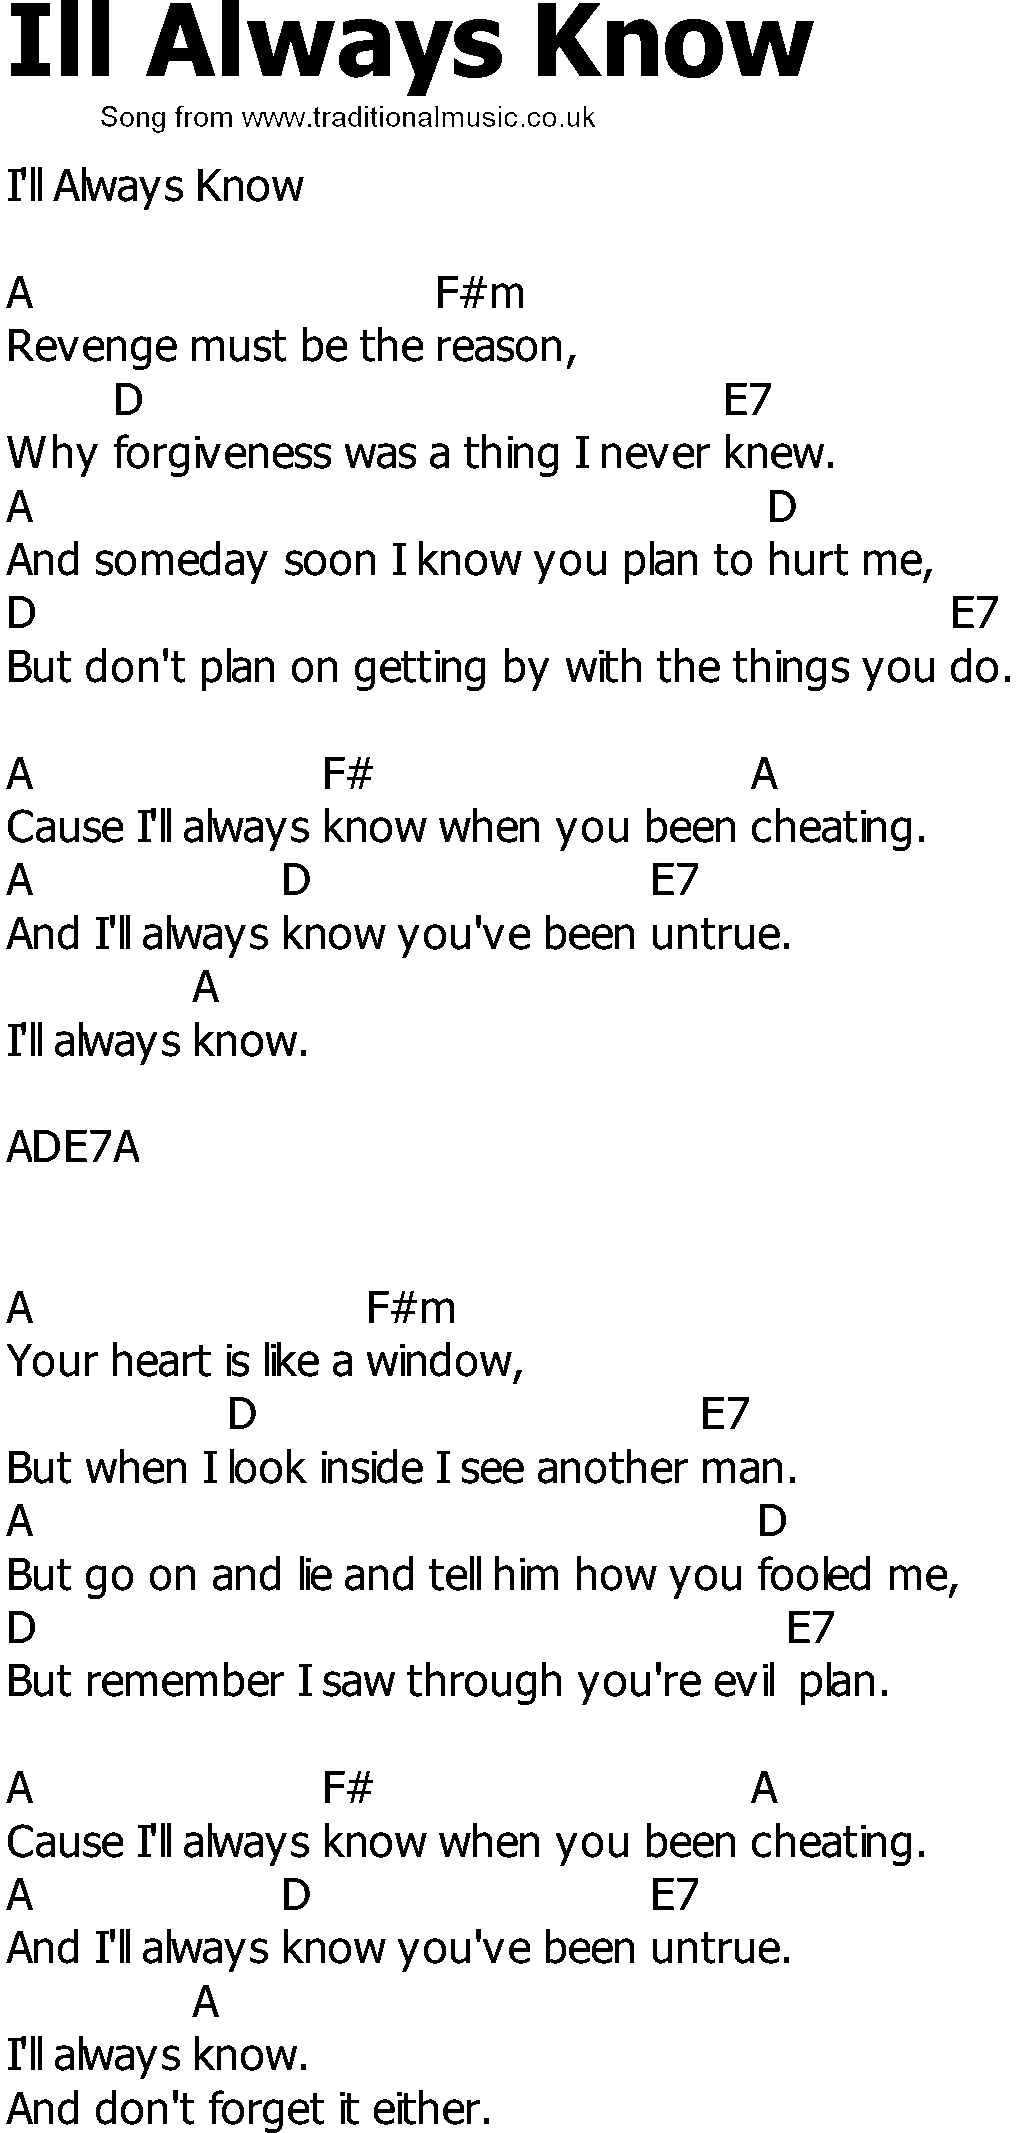 Old Country song lyrics with chords - Ill Always Know